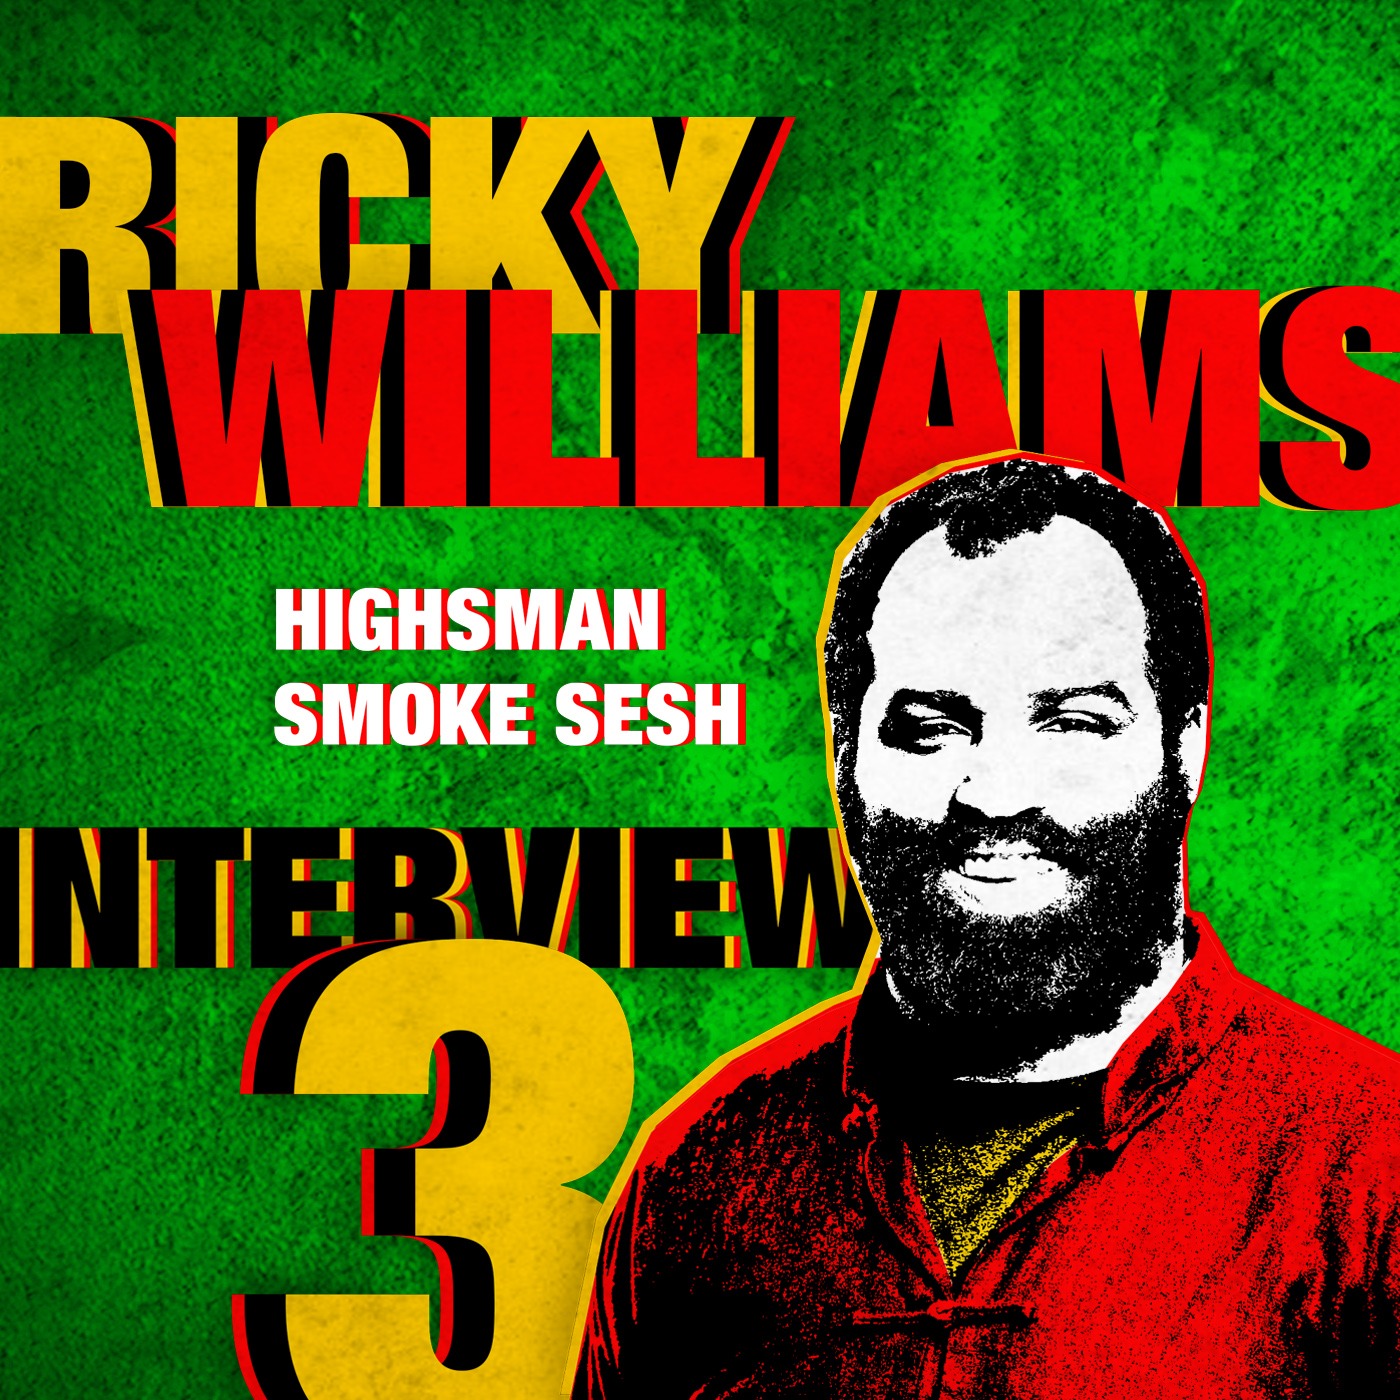 Ricky Williams LIVE Interview Image